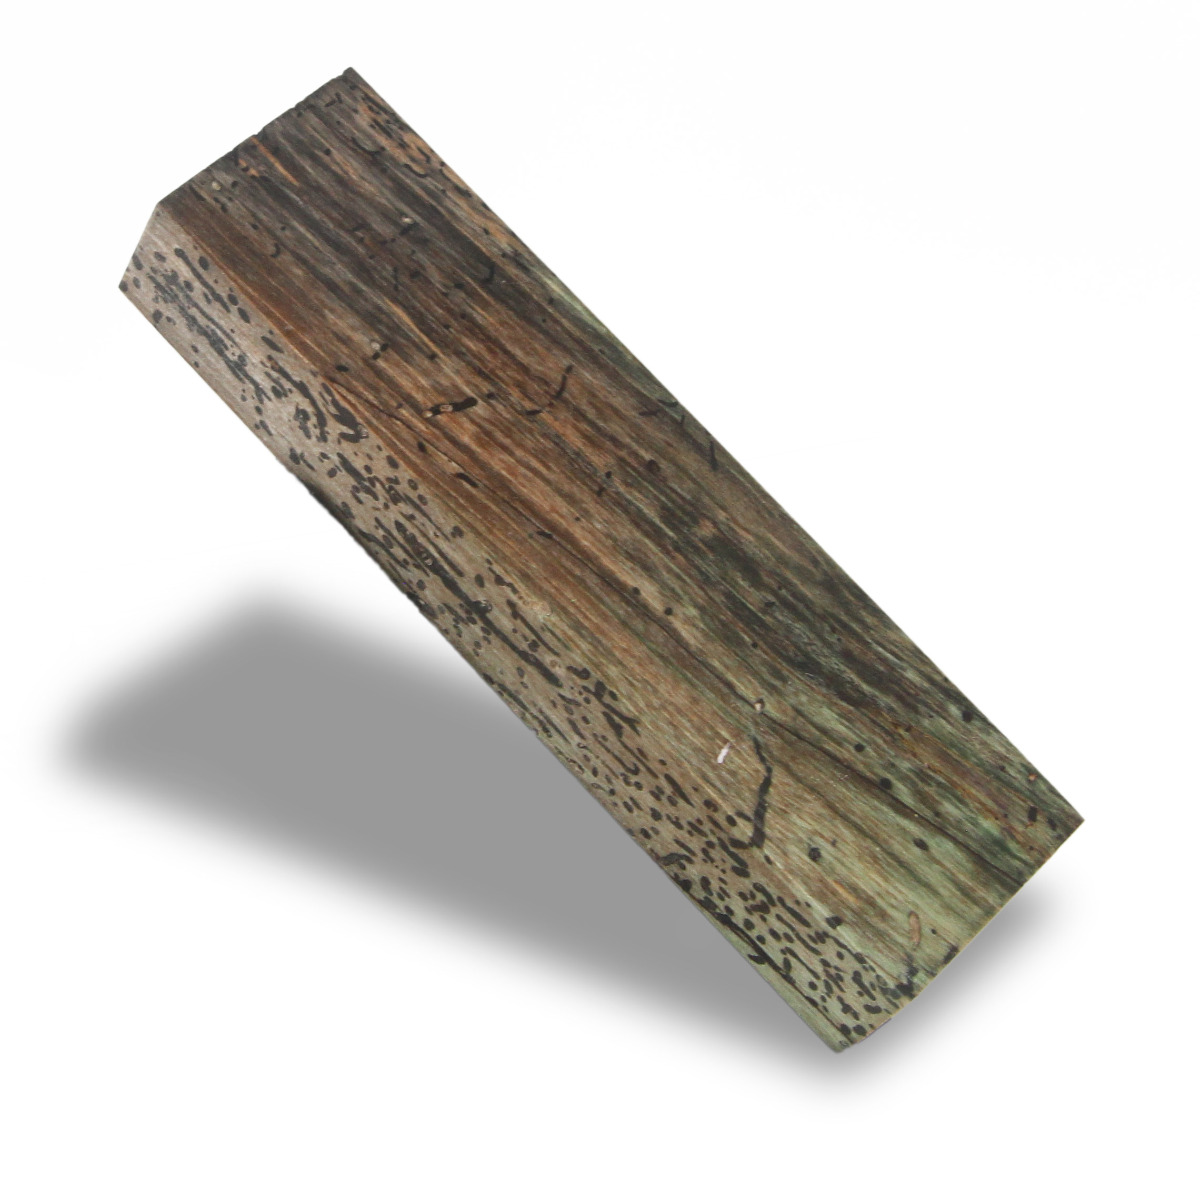 Spalted Maple Black Line Burl Knife Block - Dyed - #4036- 1.5"x 0.85"x 5.55"